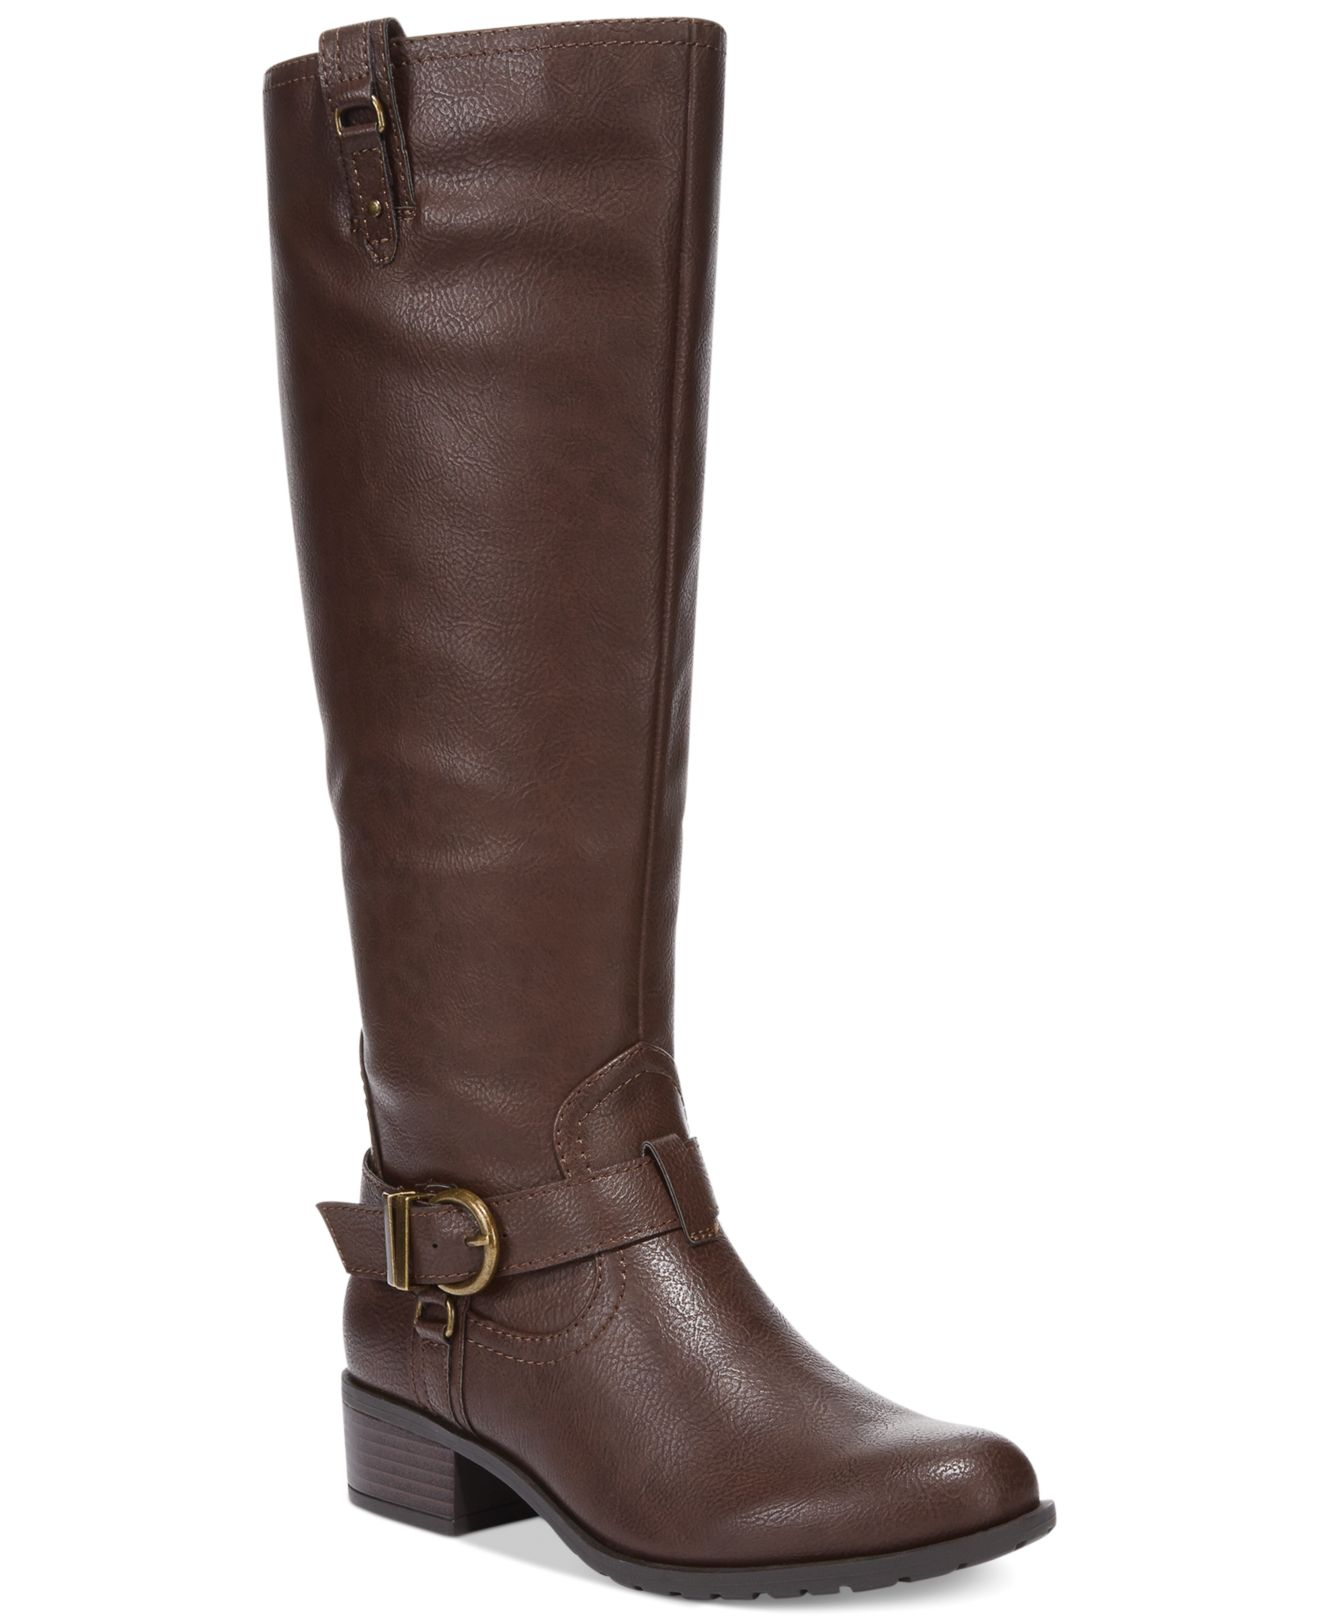 Rampage Intense Riding Boots in Brown - Lyst